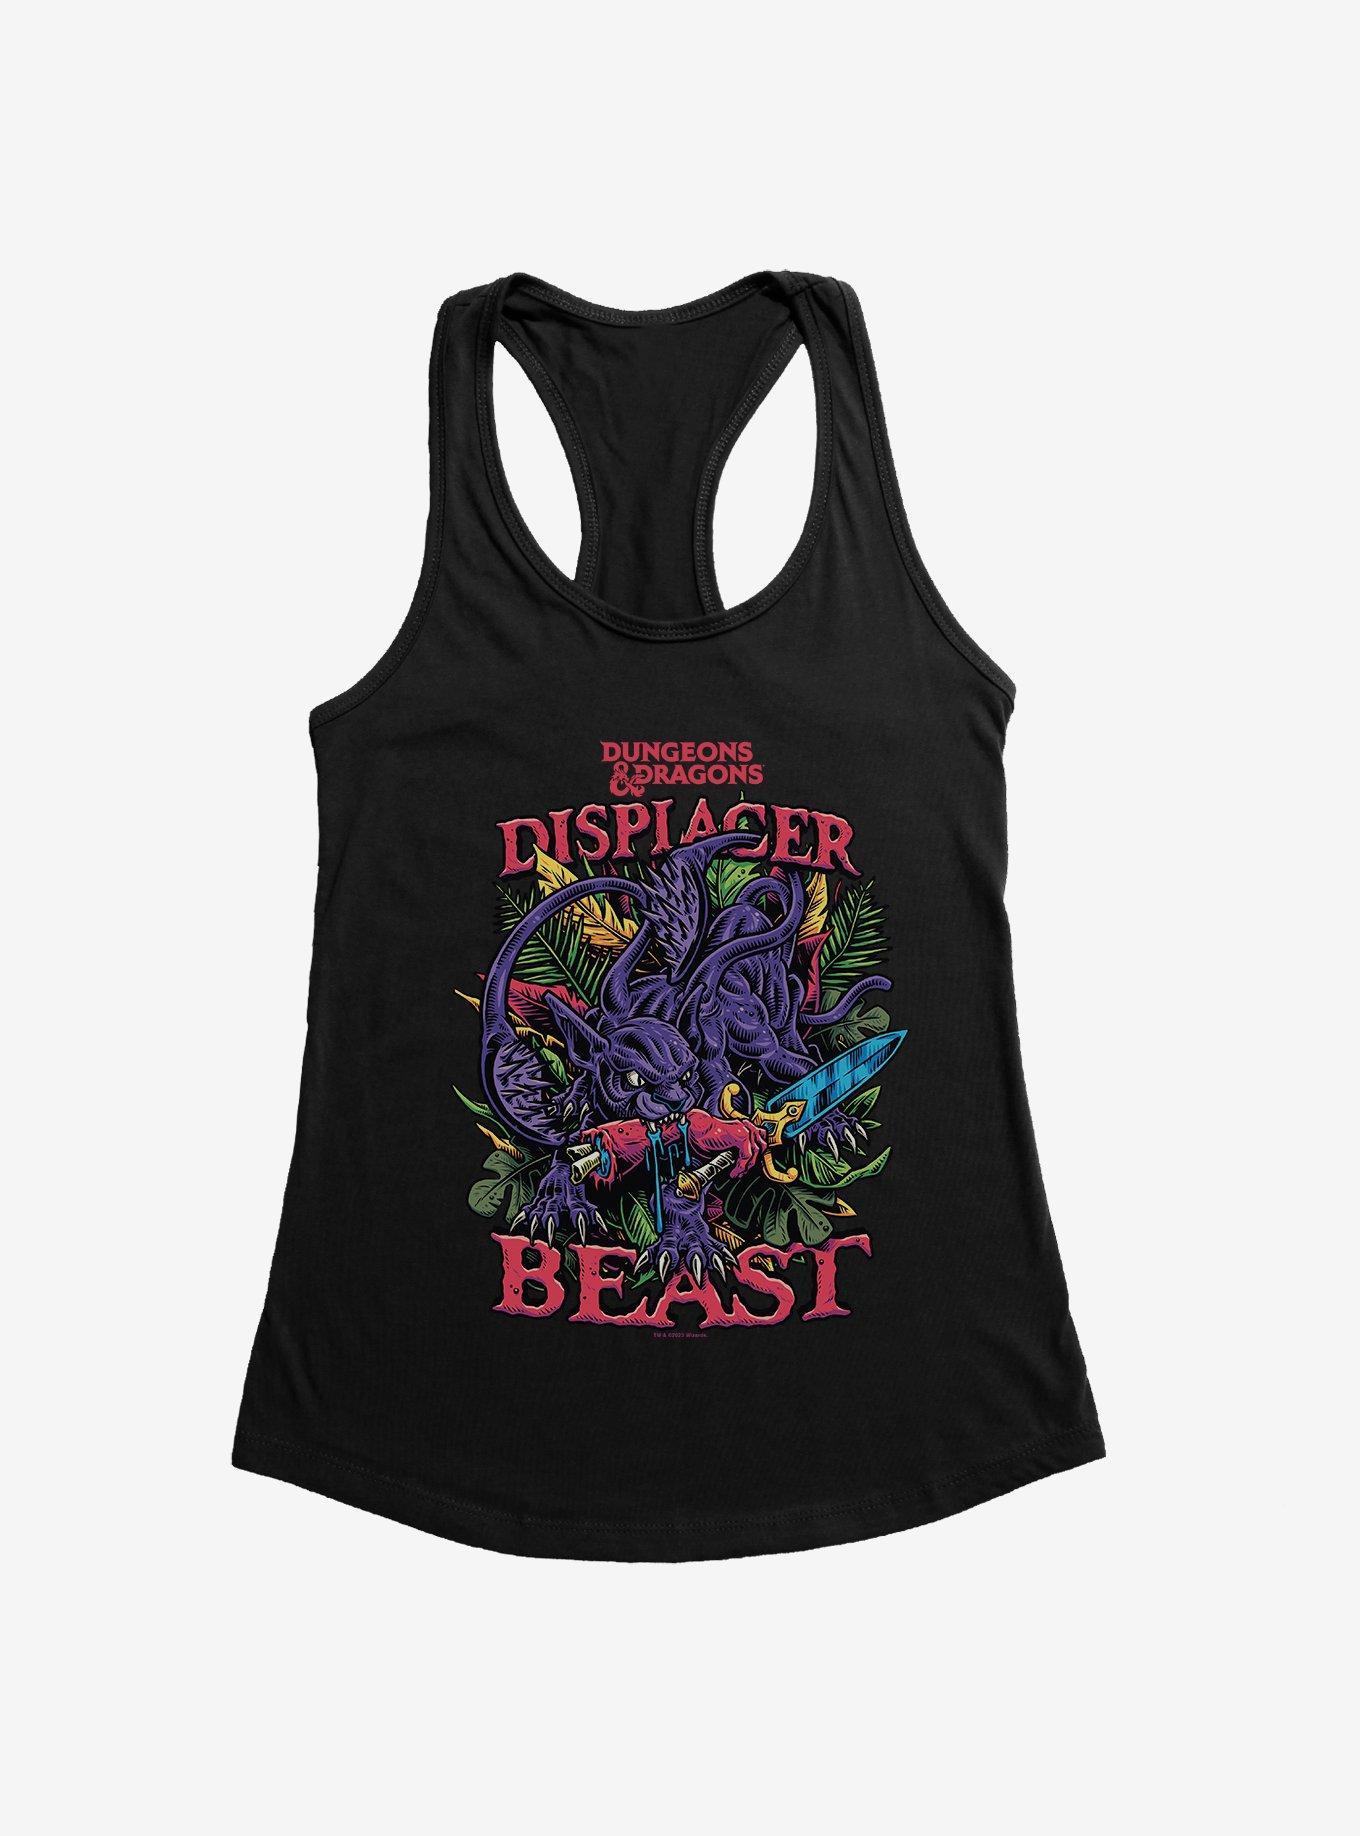 Dungeons And Dragons Displacer Beast Girls Tank